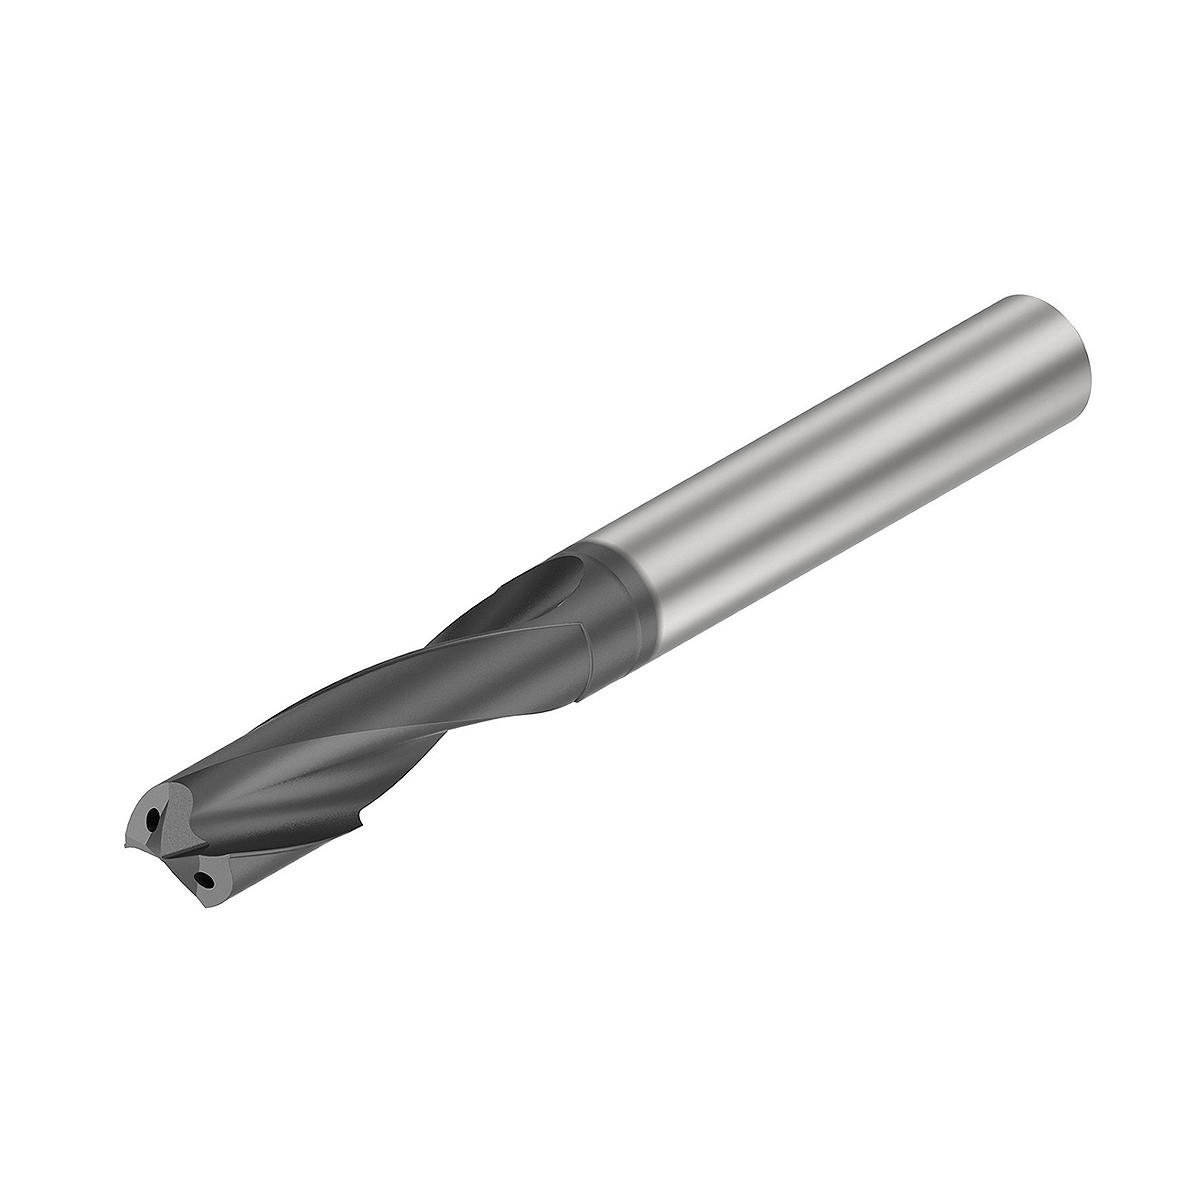 Solid Carbide Drill for CFRP/Metal Stack Rivot Hole Machining in Aerospace